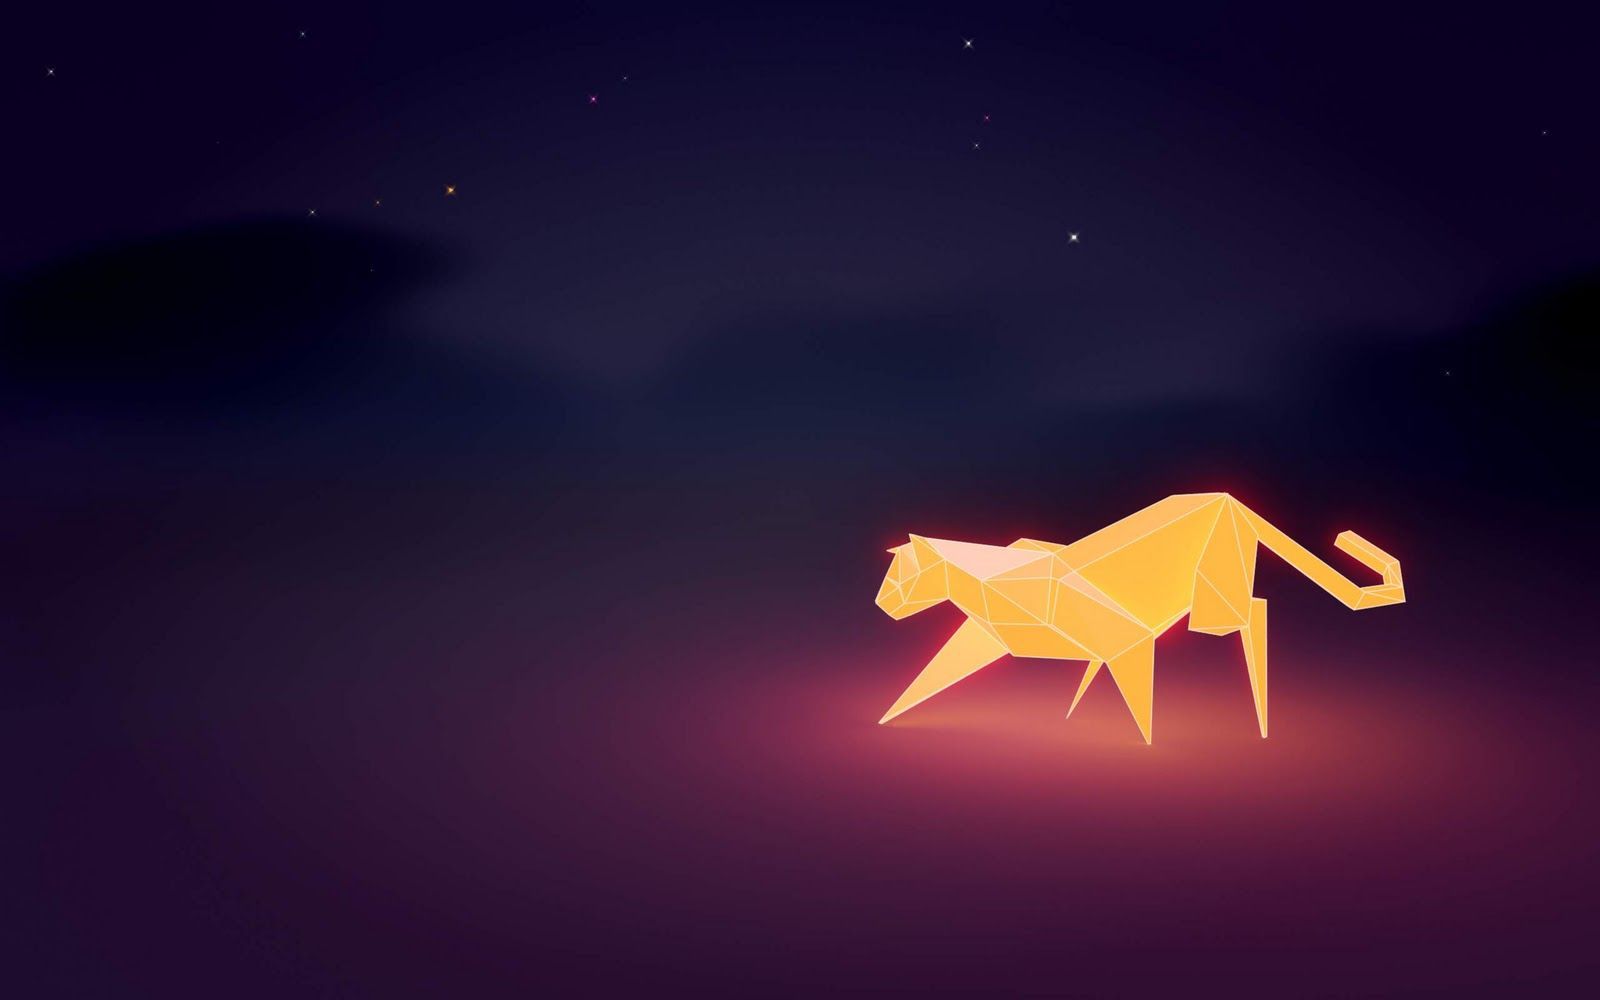 New Set of 14 Wallpapers for Ubuntu 11.10 is Perhaps the Best